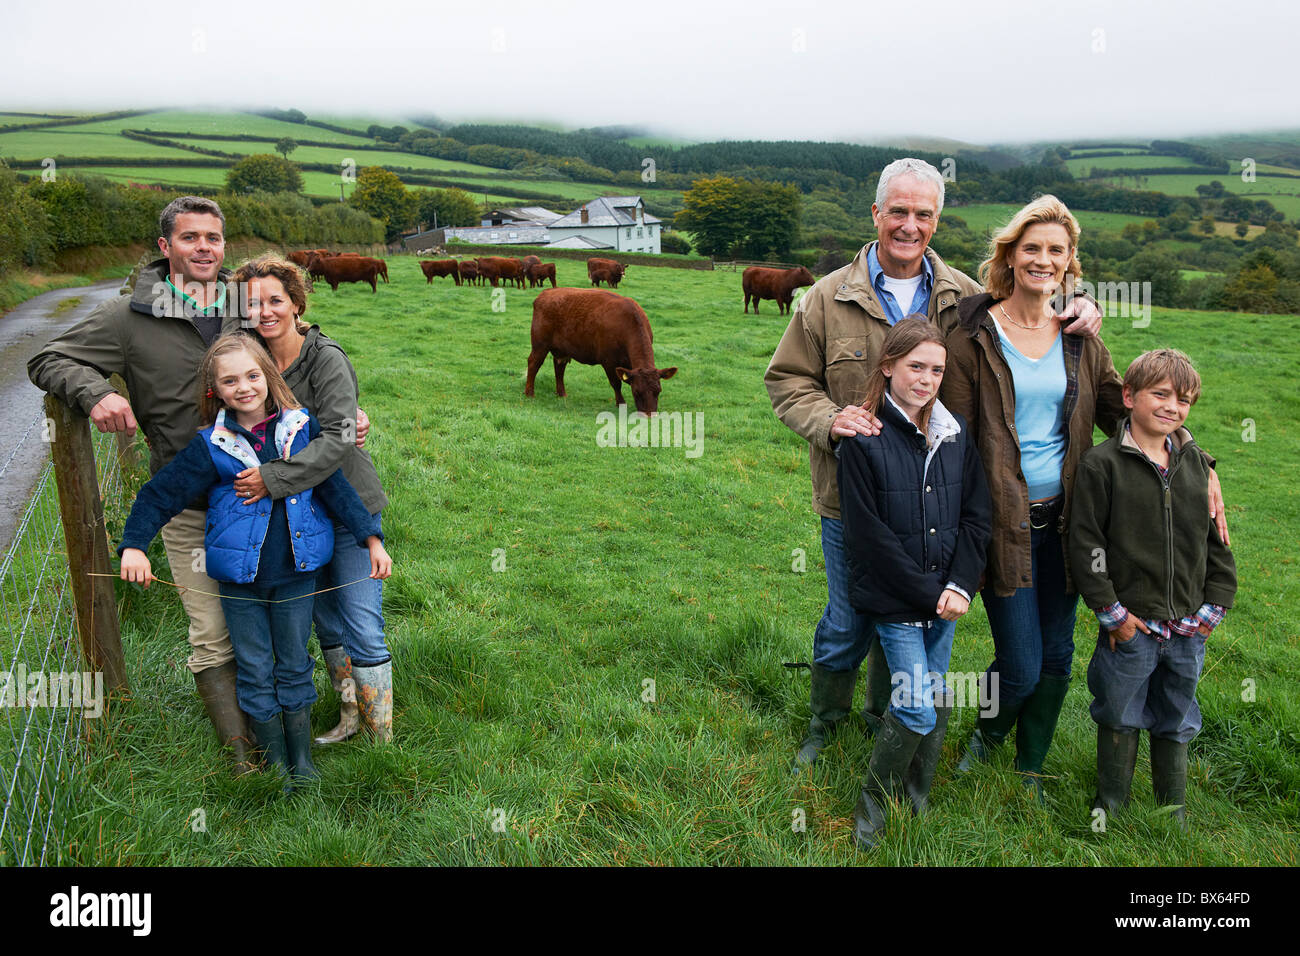 Family on farm in a field with cows Stock Photo